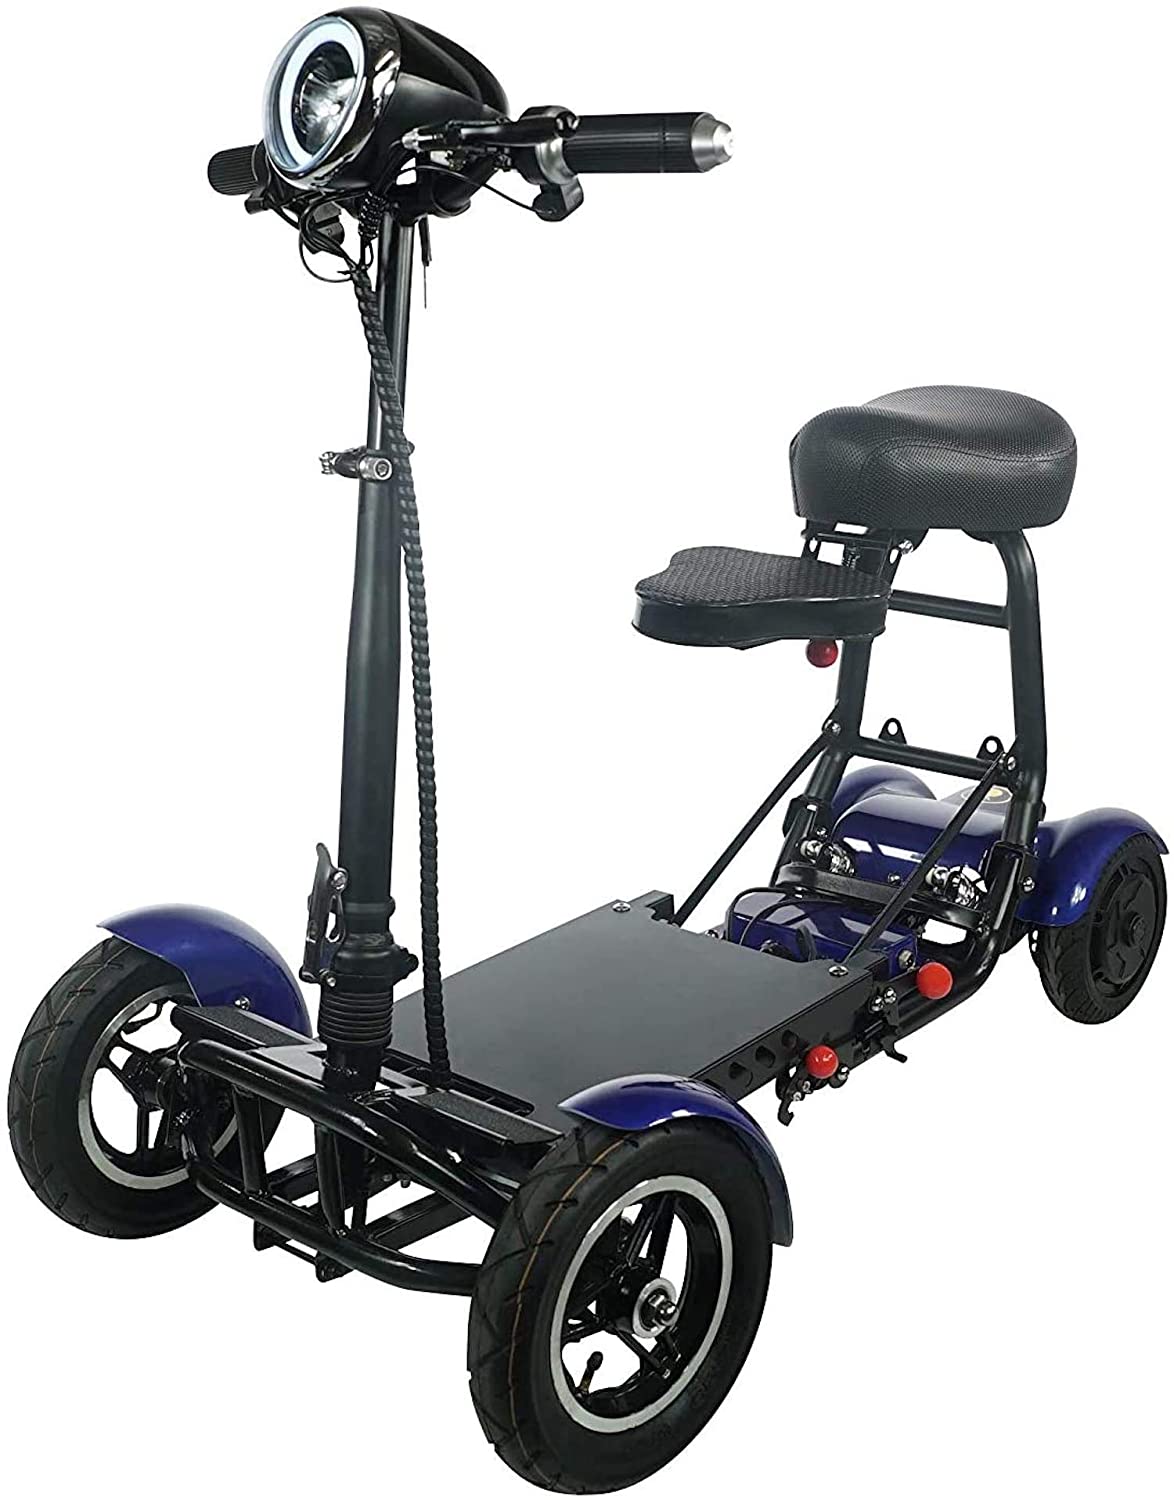 Top 10 Best Portable Mobility Scooter (2022 Reviews) - Brand Review